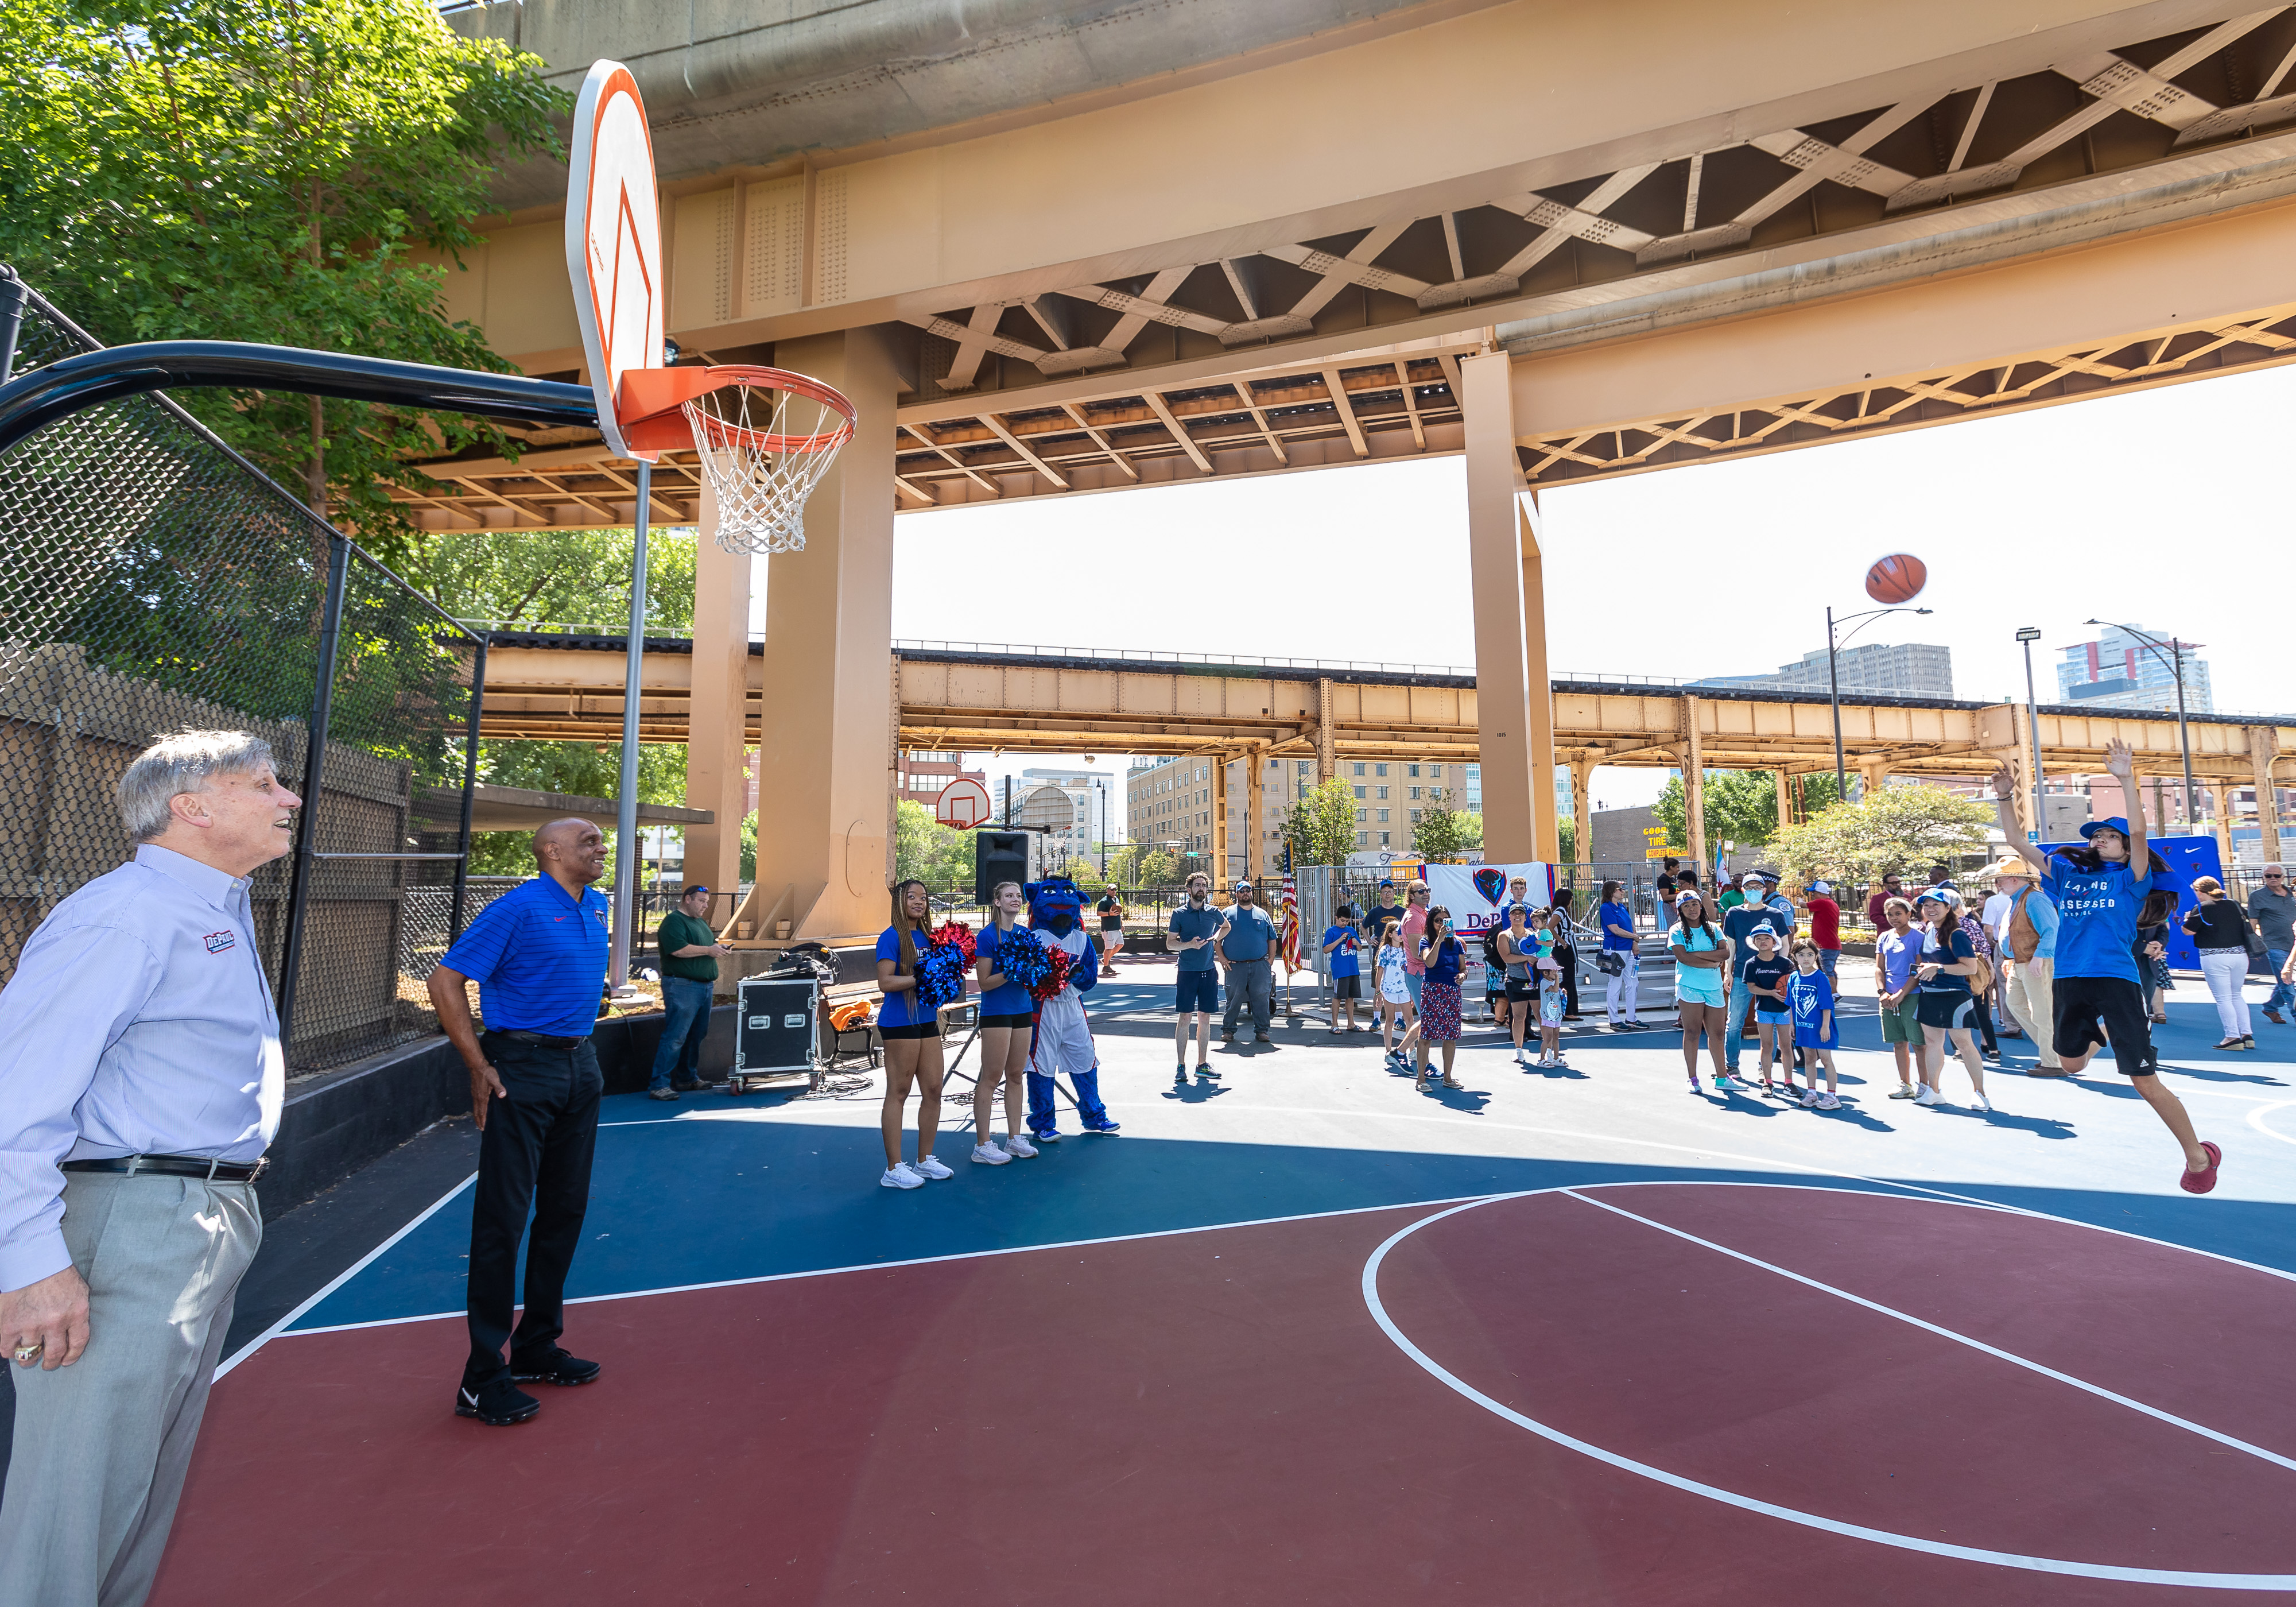 DePaul Basketball Head Coaches Doug Bruno, far left, and Tony Stubblefield, center, play basketball with community members during a grand opening.